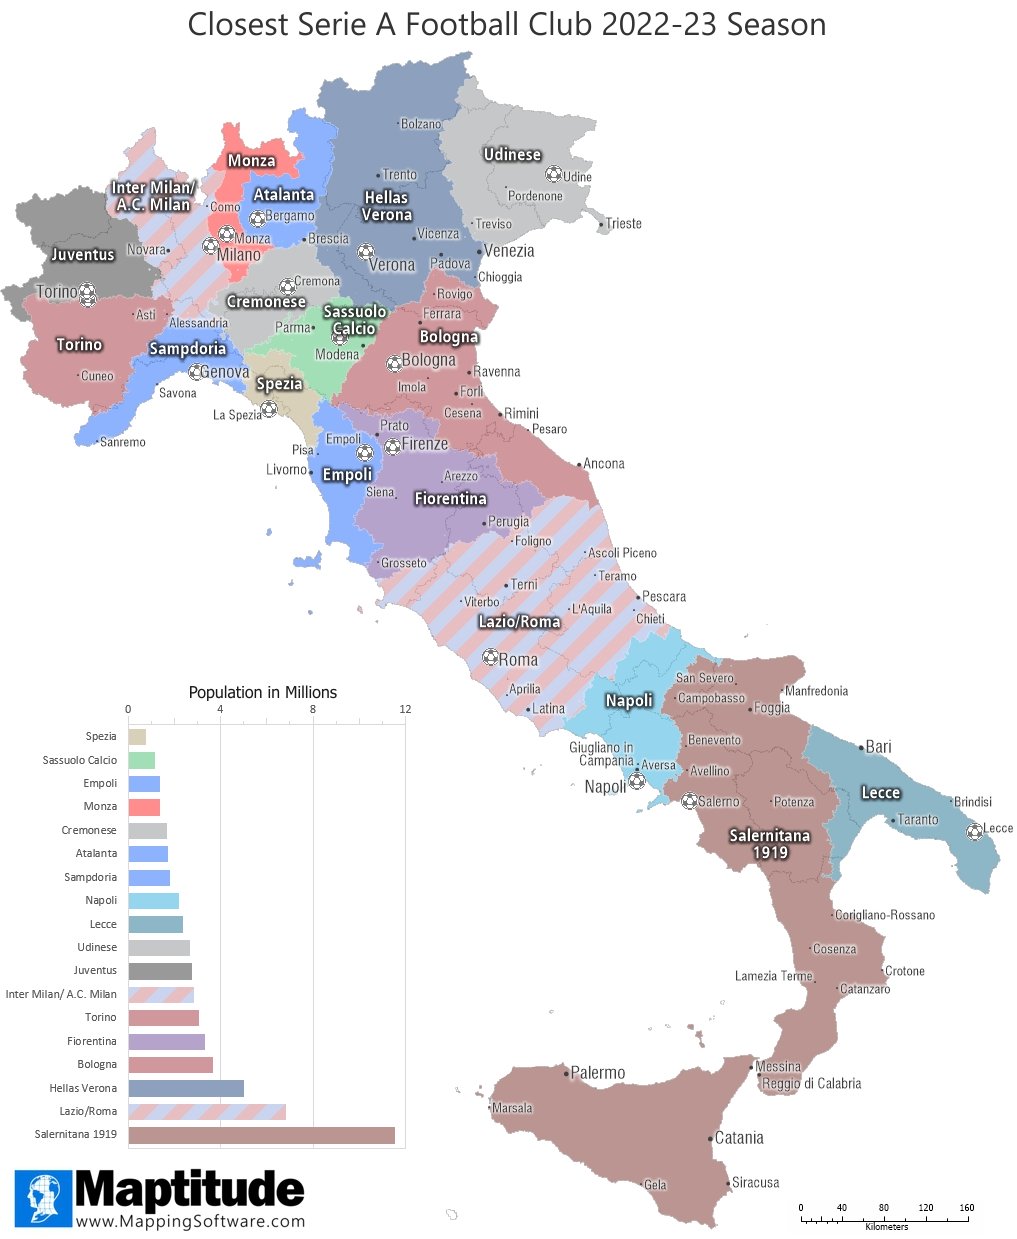 Maptitude mapping software infographic of Closest Serie A Football Club